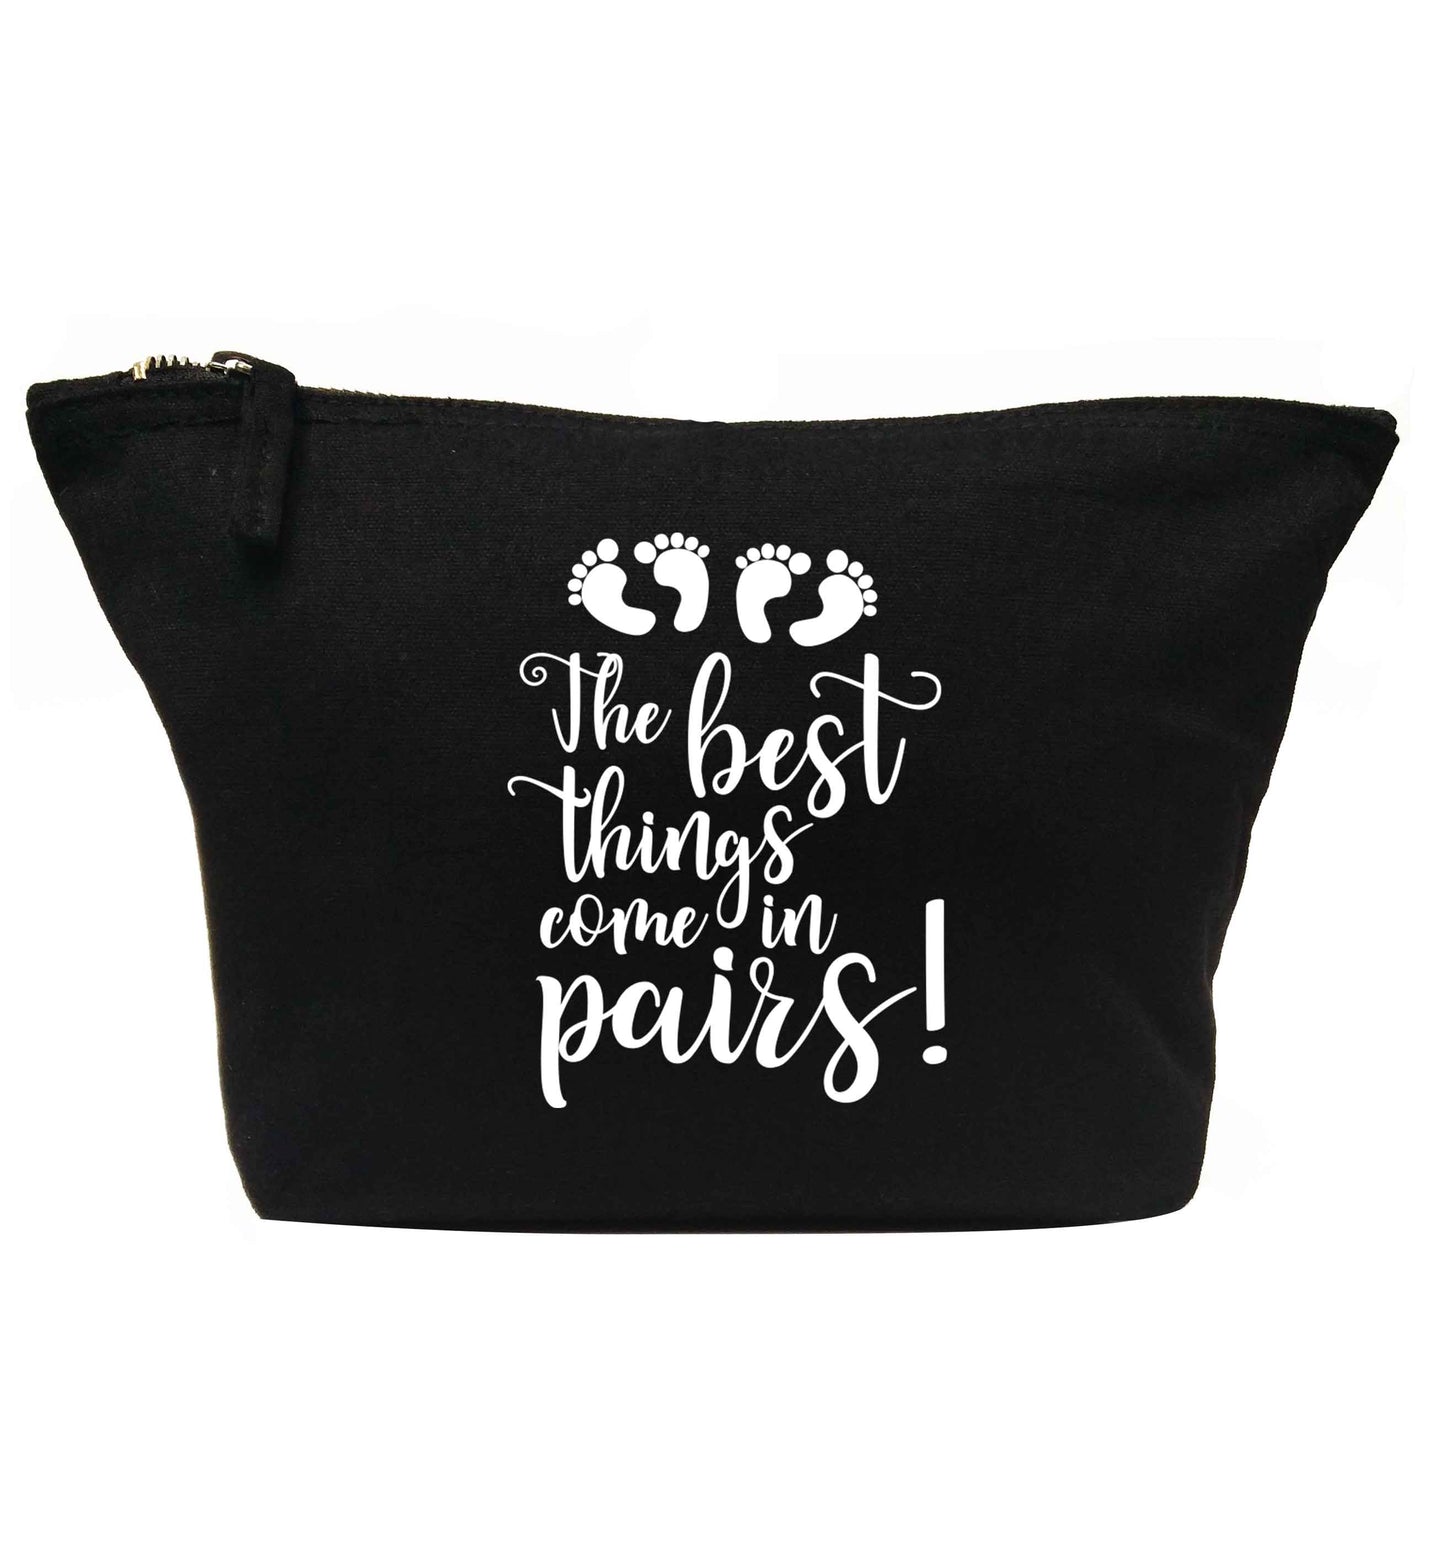 The best things come in pairs! | Makeup / wash bag